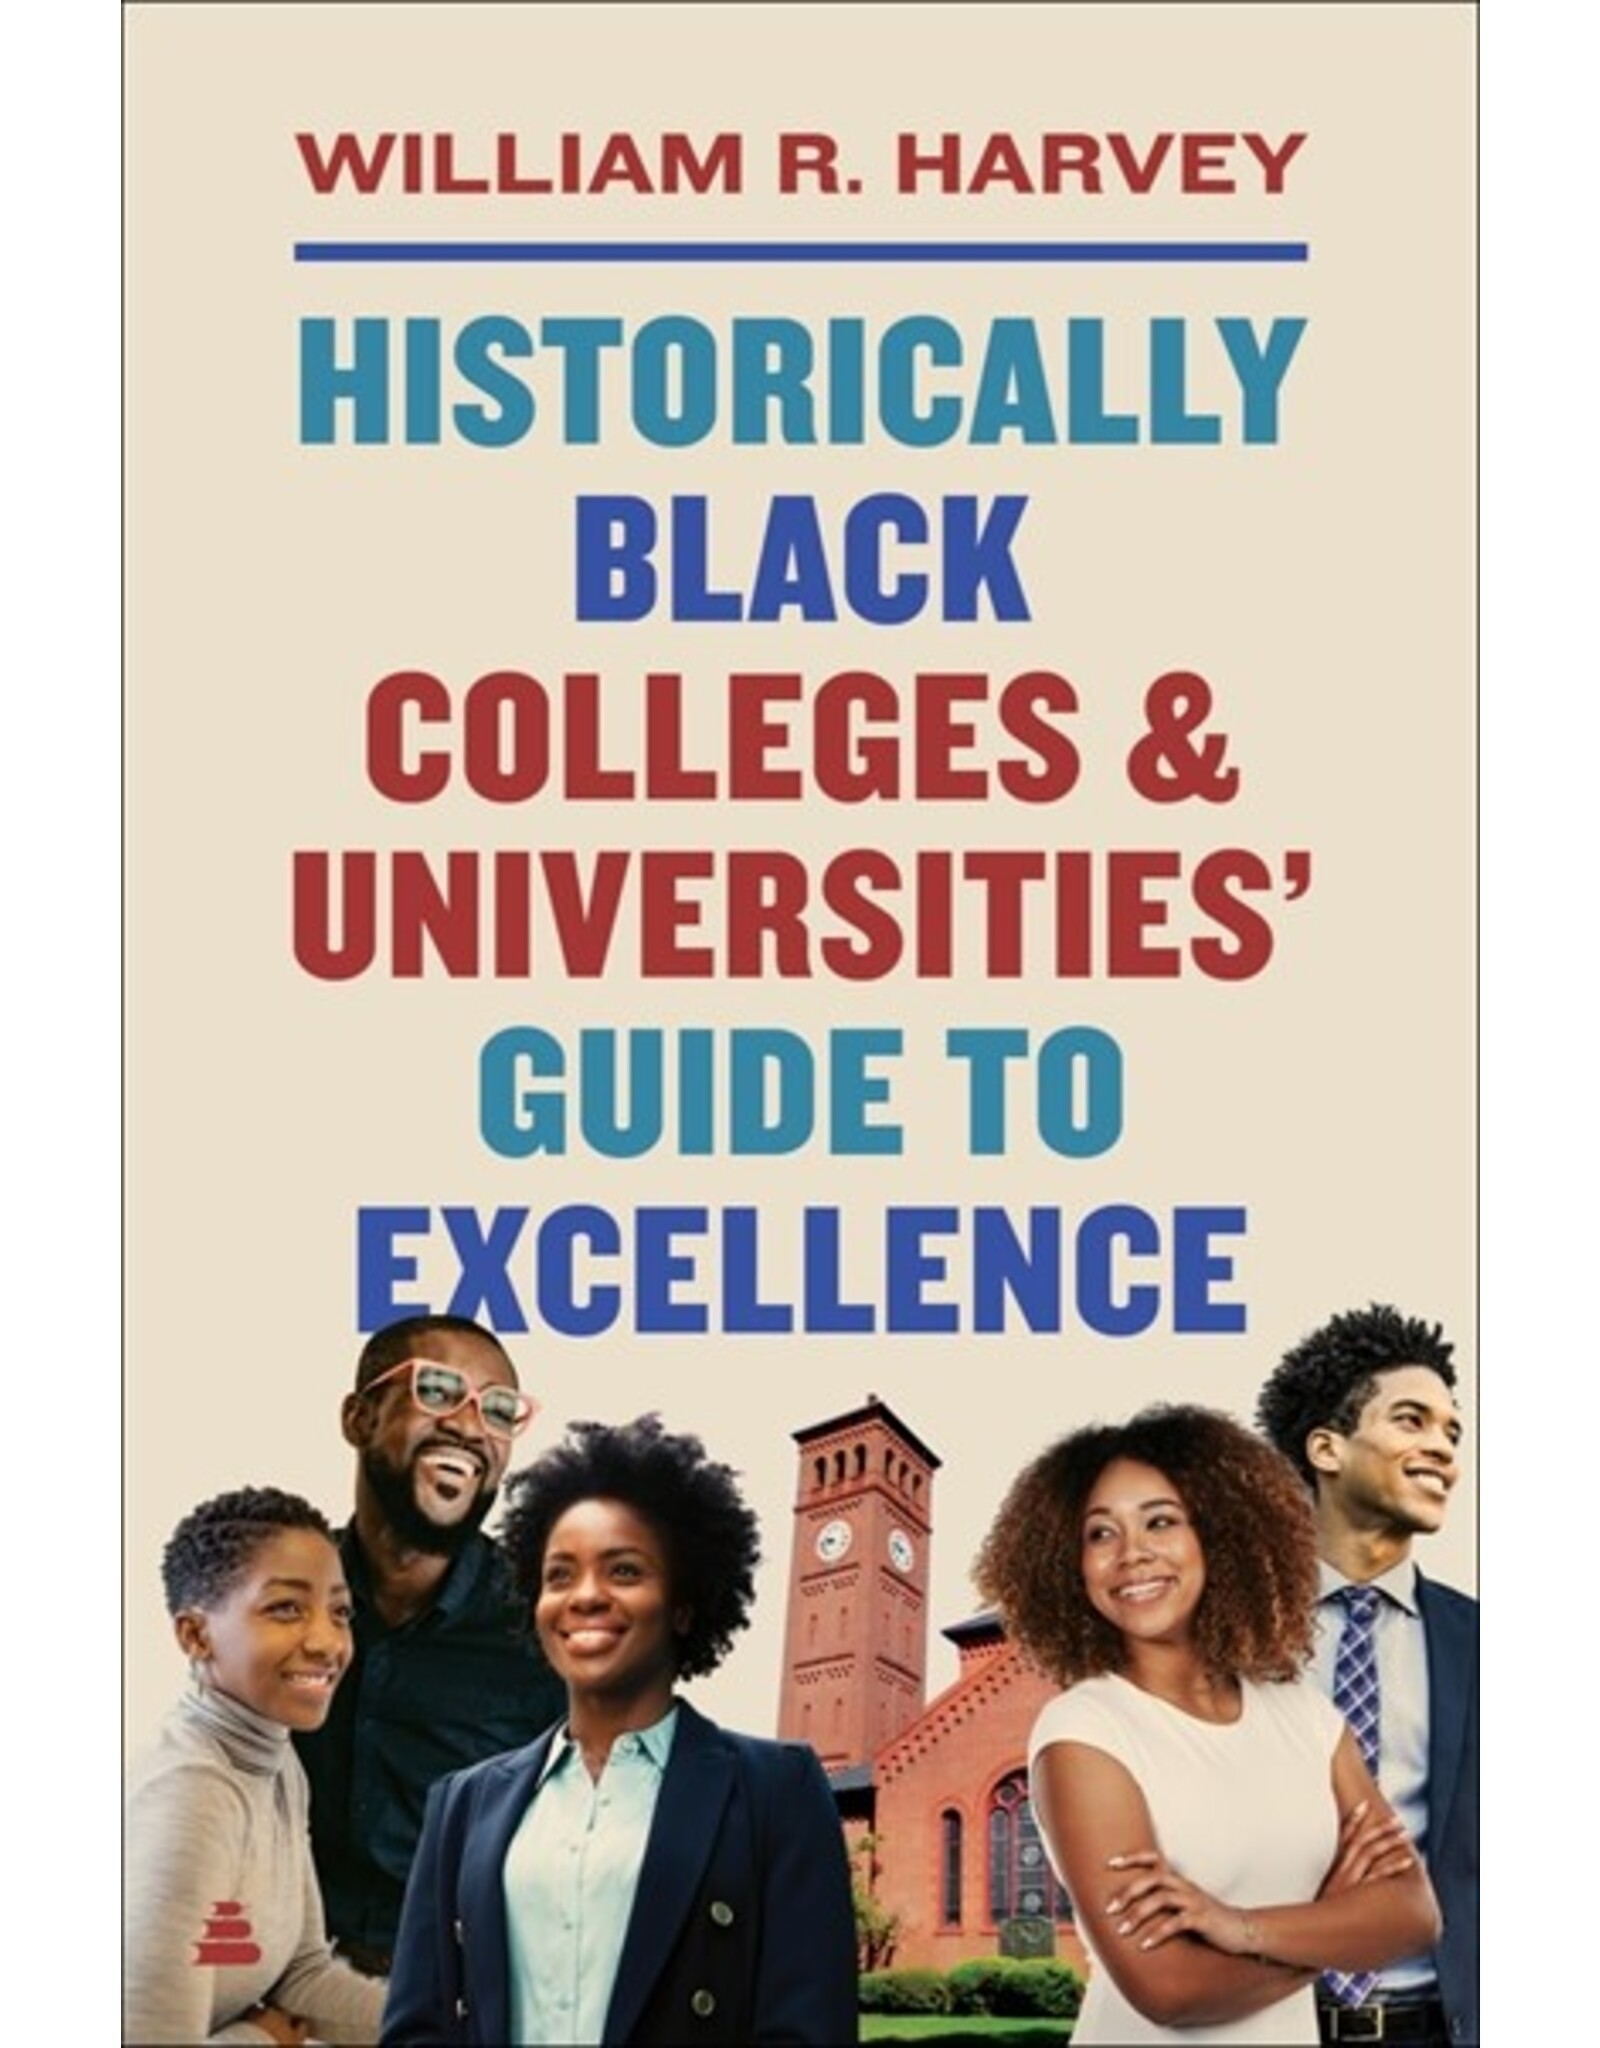 Books Historically Black Colleges & Universities Guide to Excellence by William R. Harvey